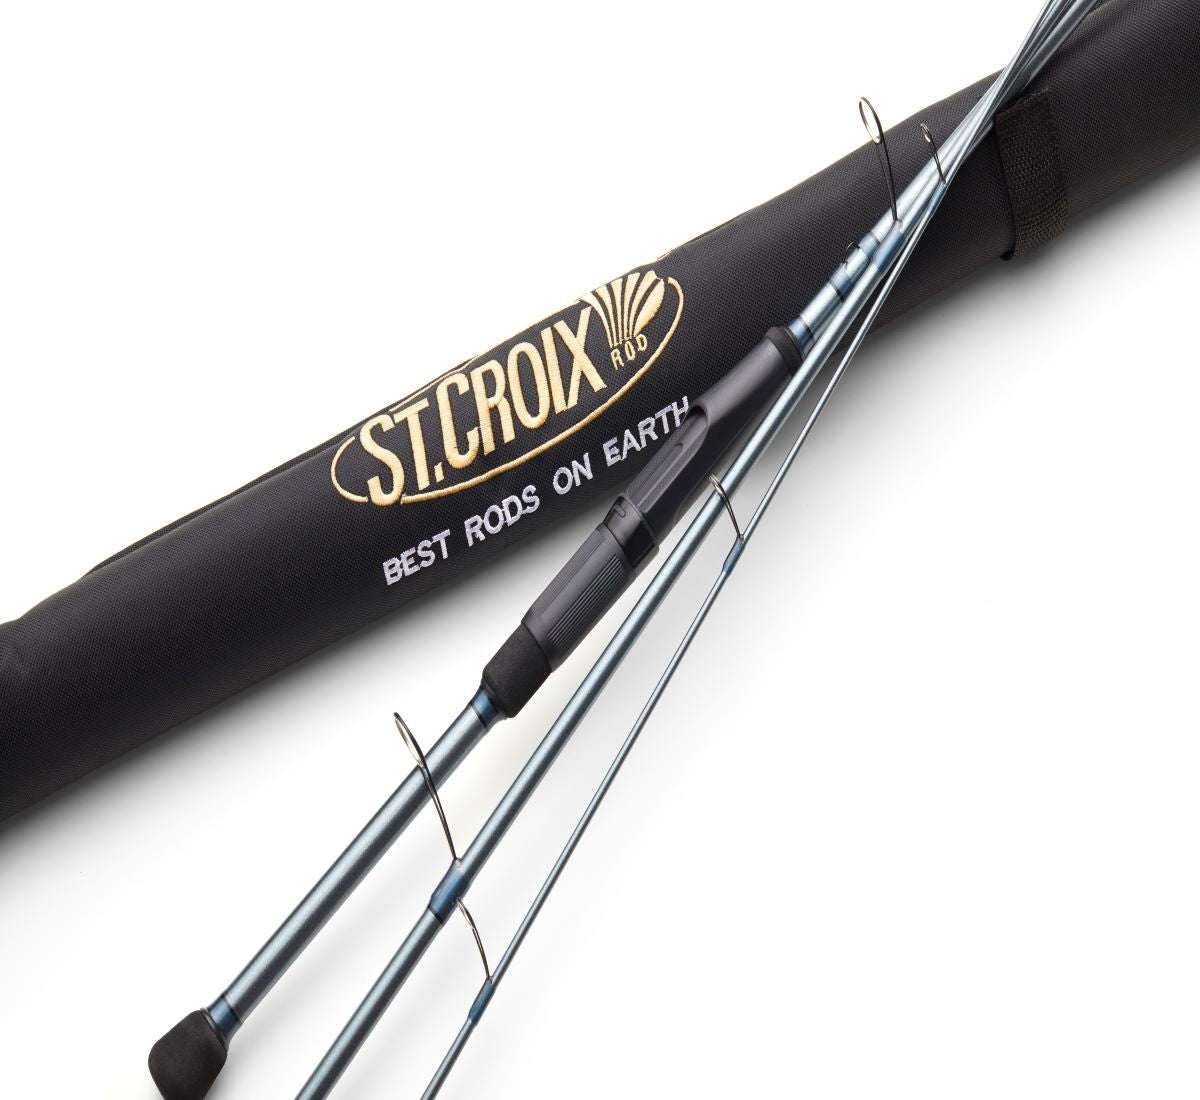 St. Croix Rod and #sevin reels are now in stock. #bigrideautackle